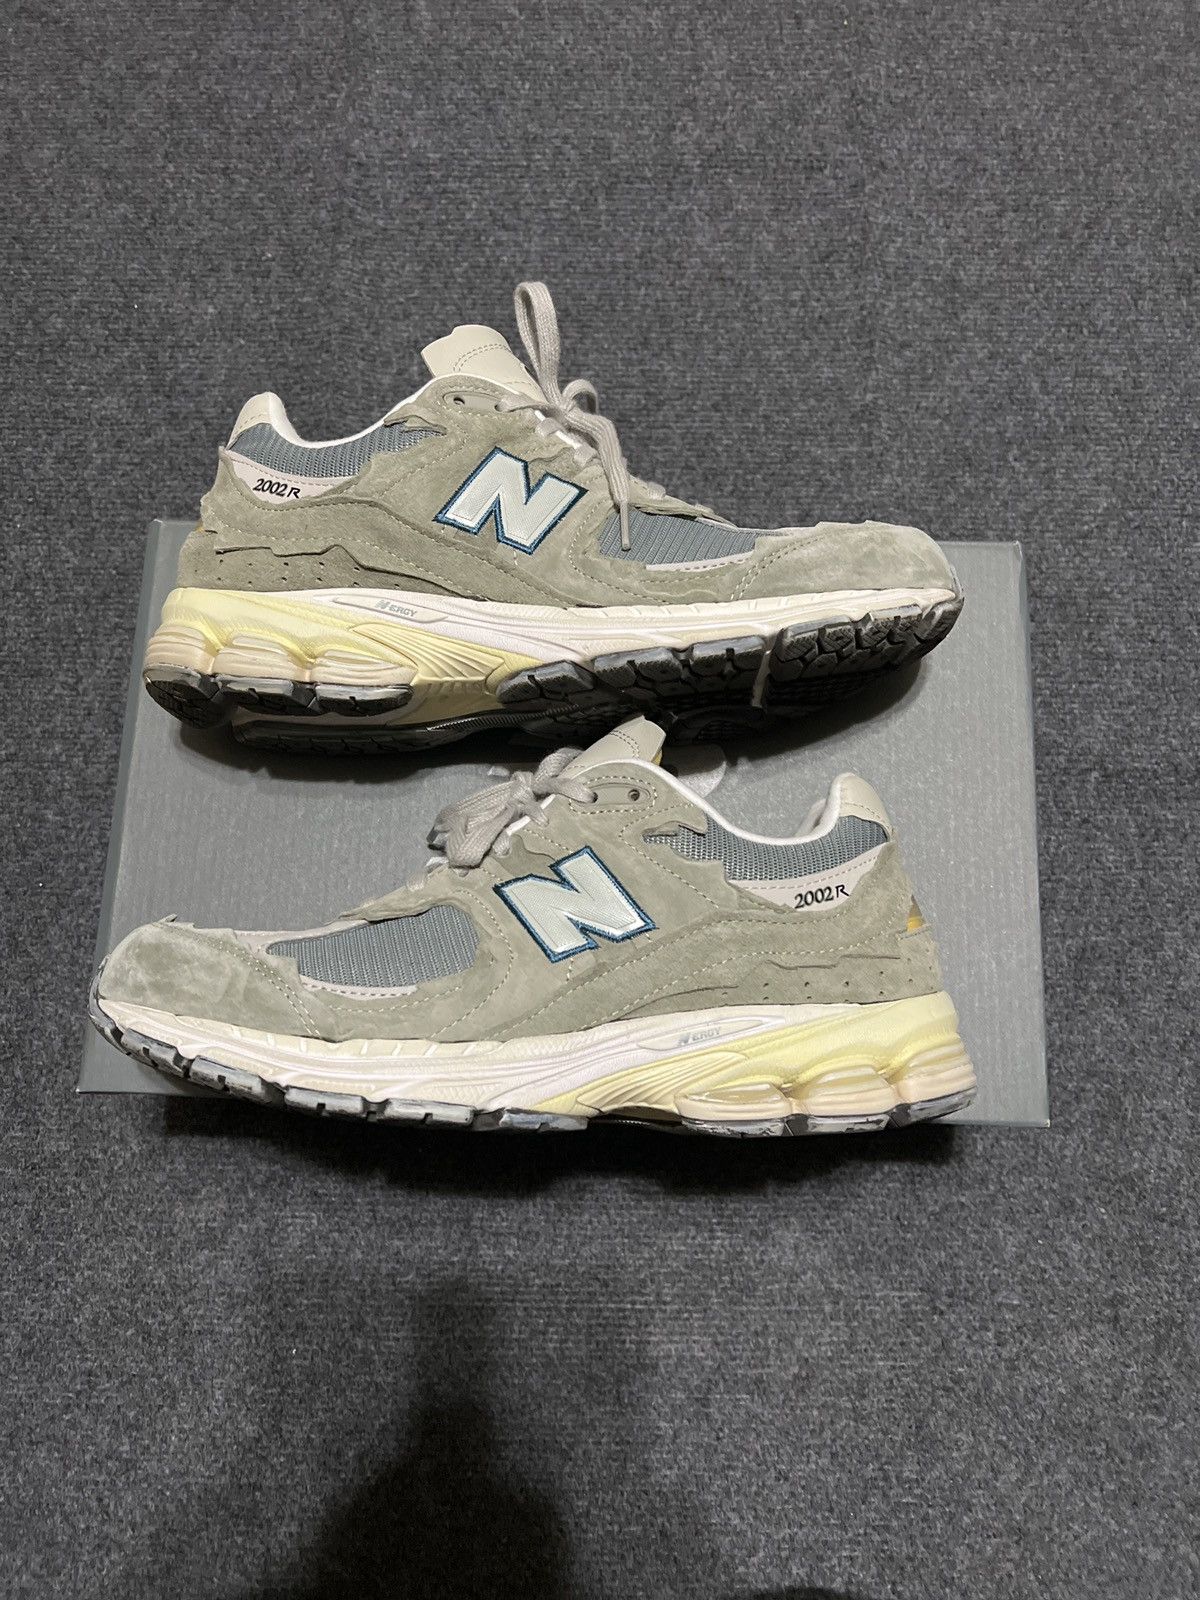 New Balance New Balance 2002R Protection Pack-Mirage Gray | Grailed